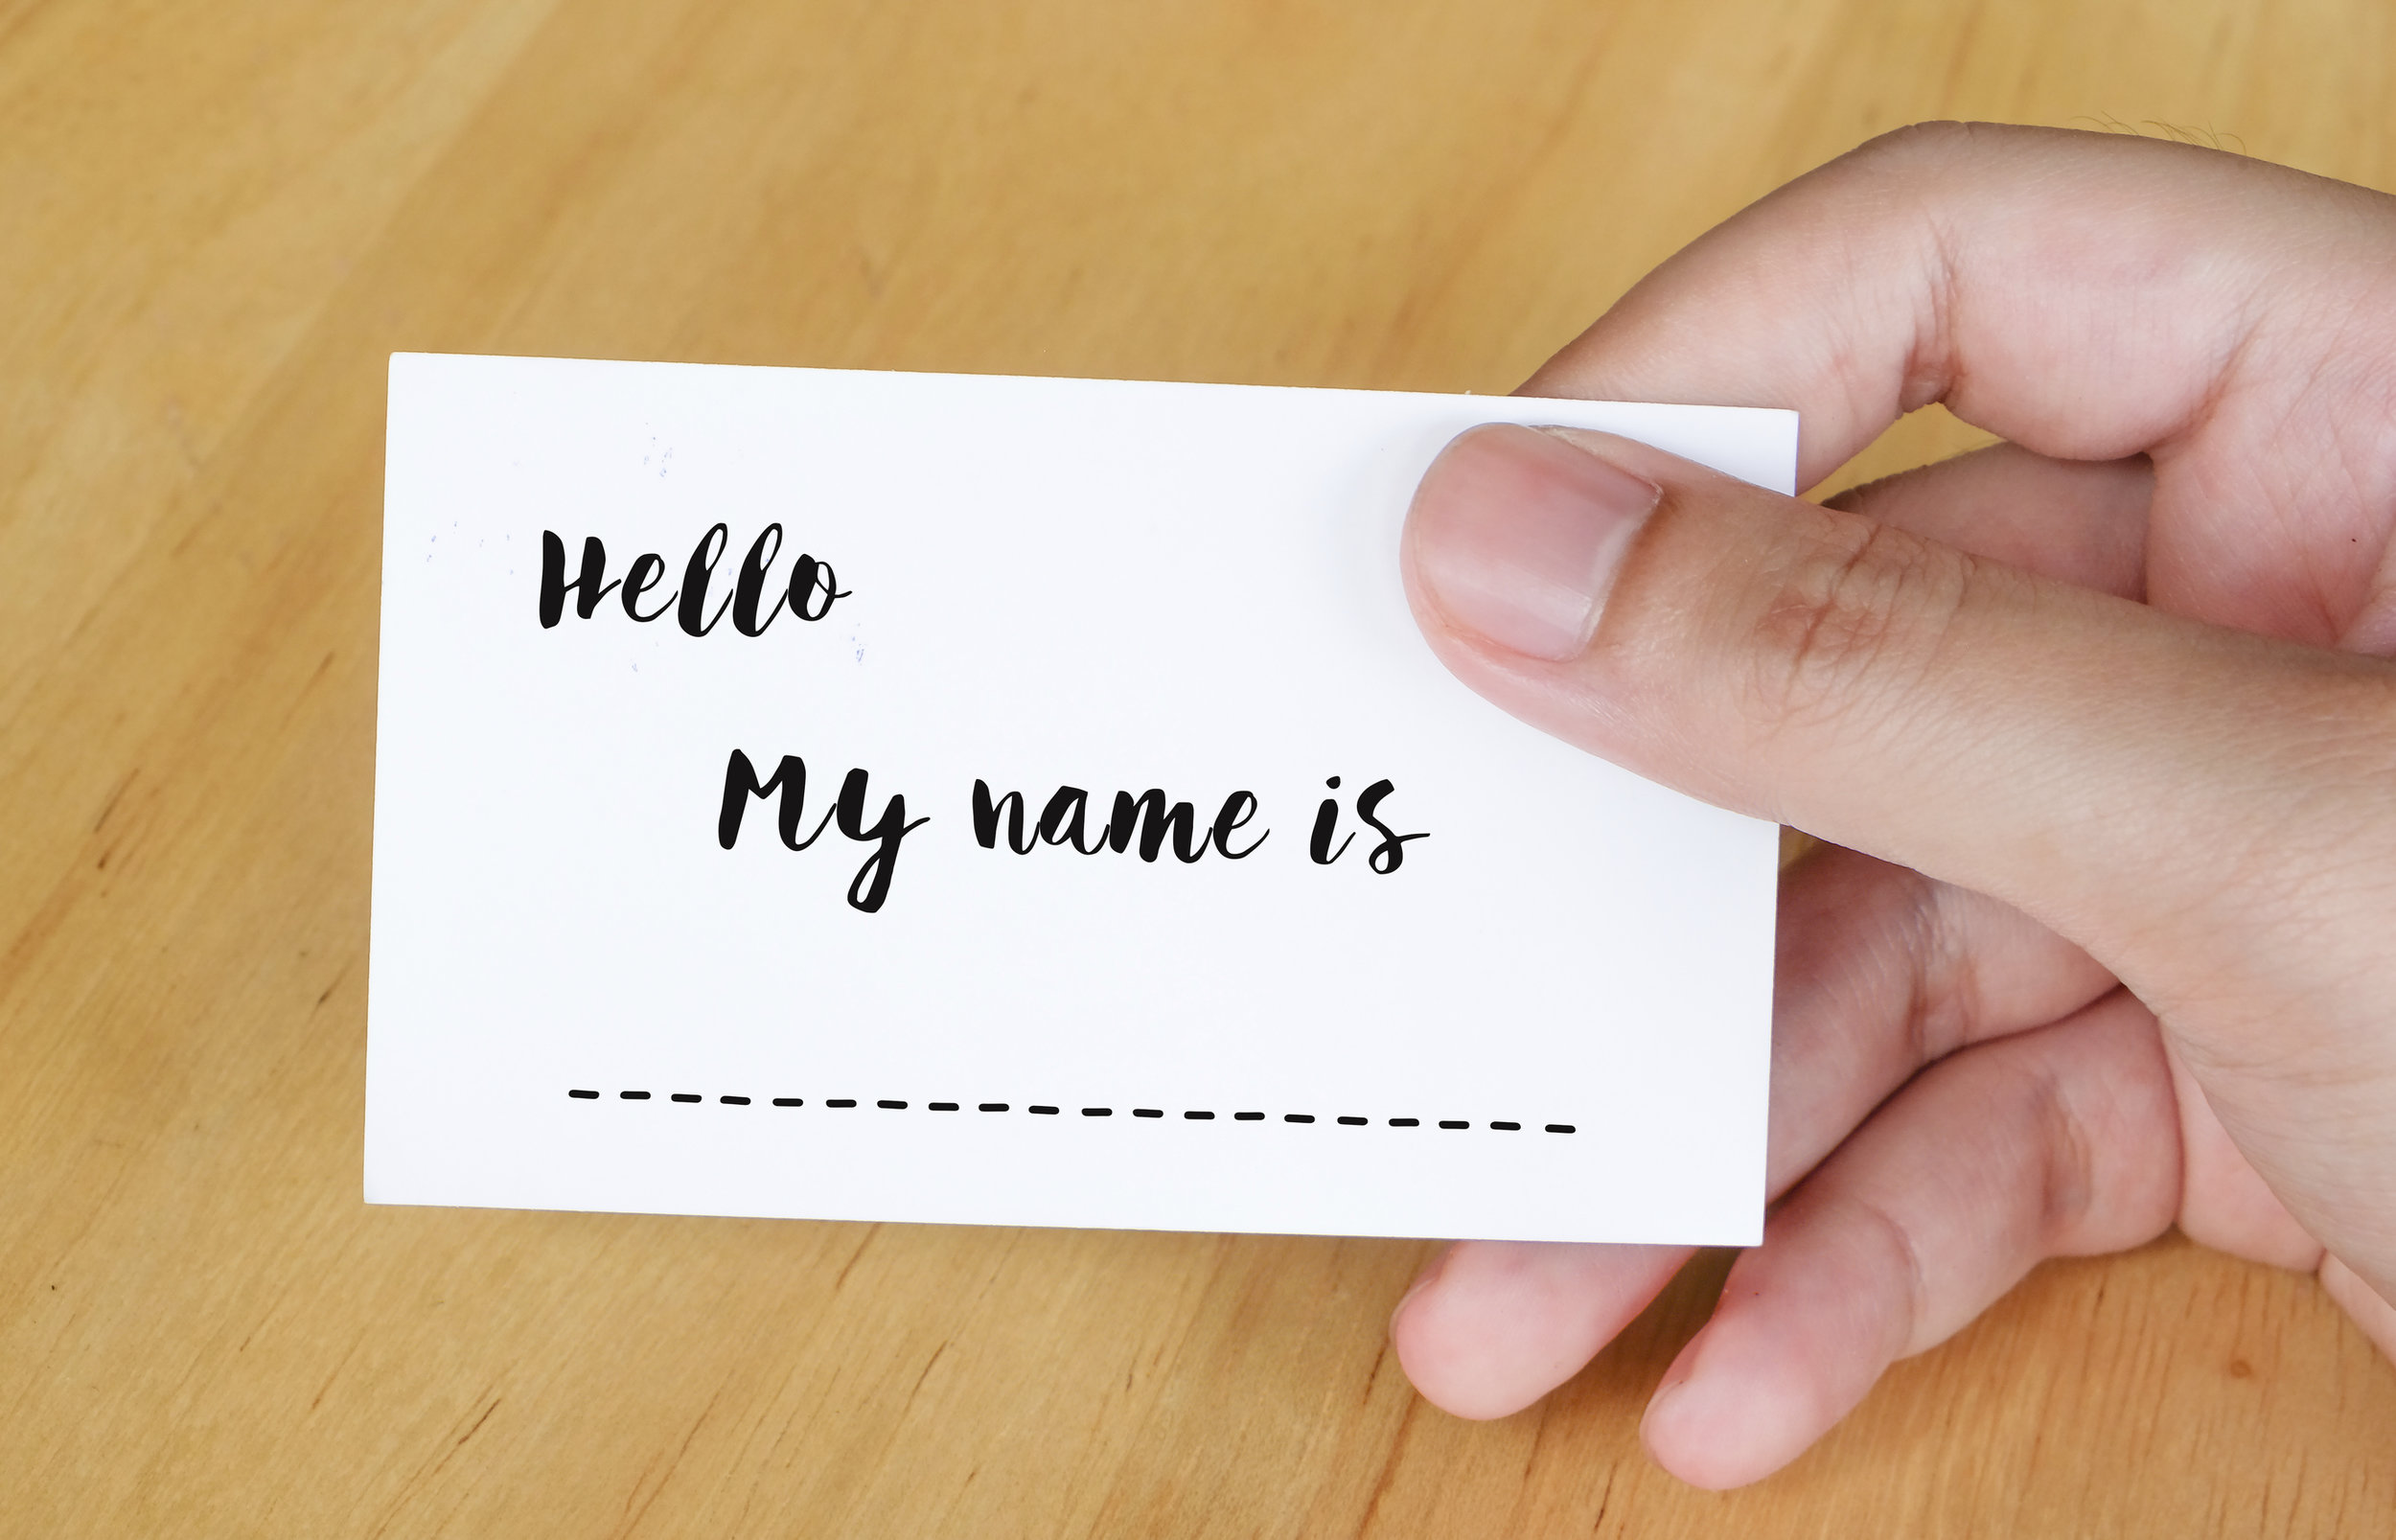 Choosing a name for your business can be deceptively difficult